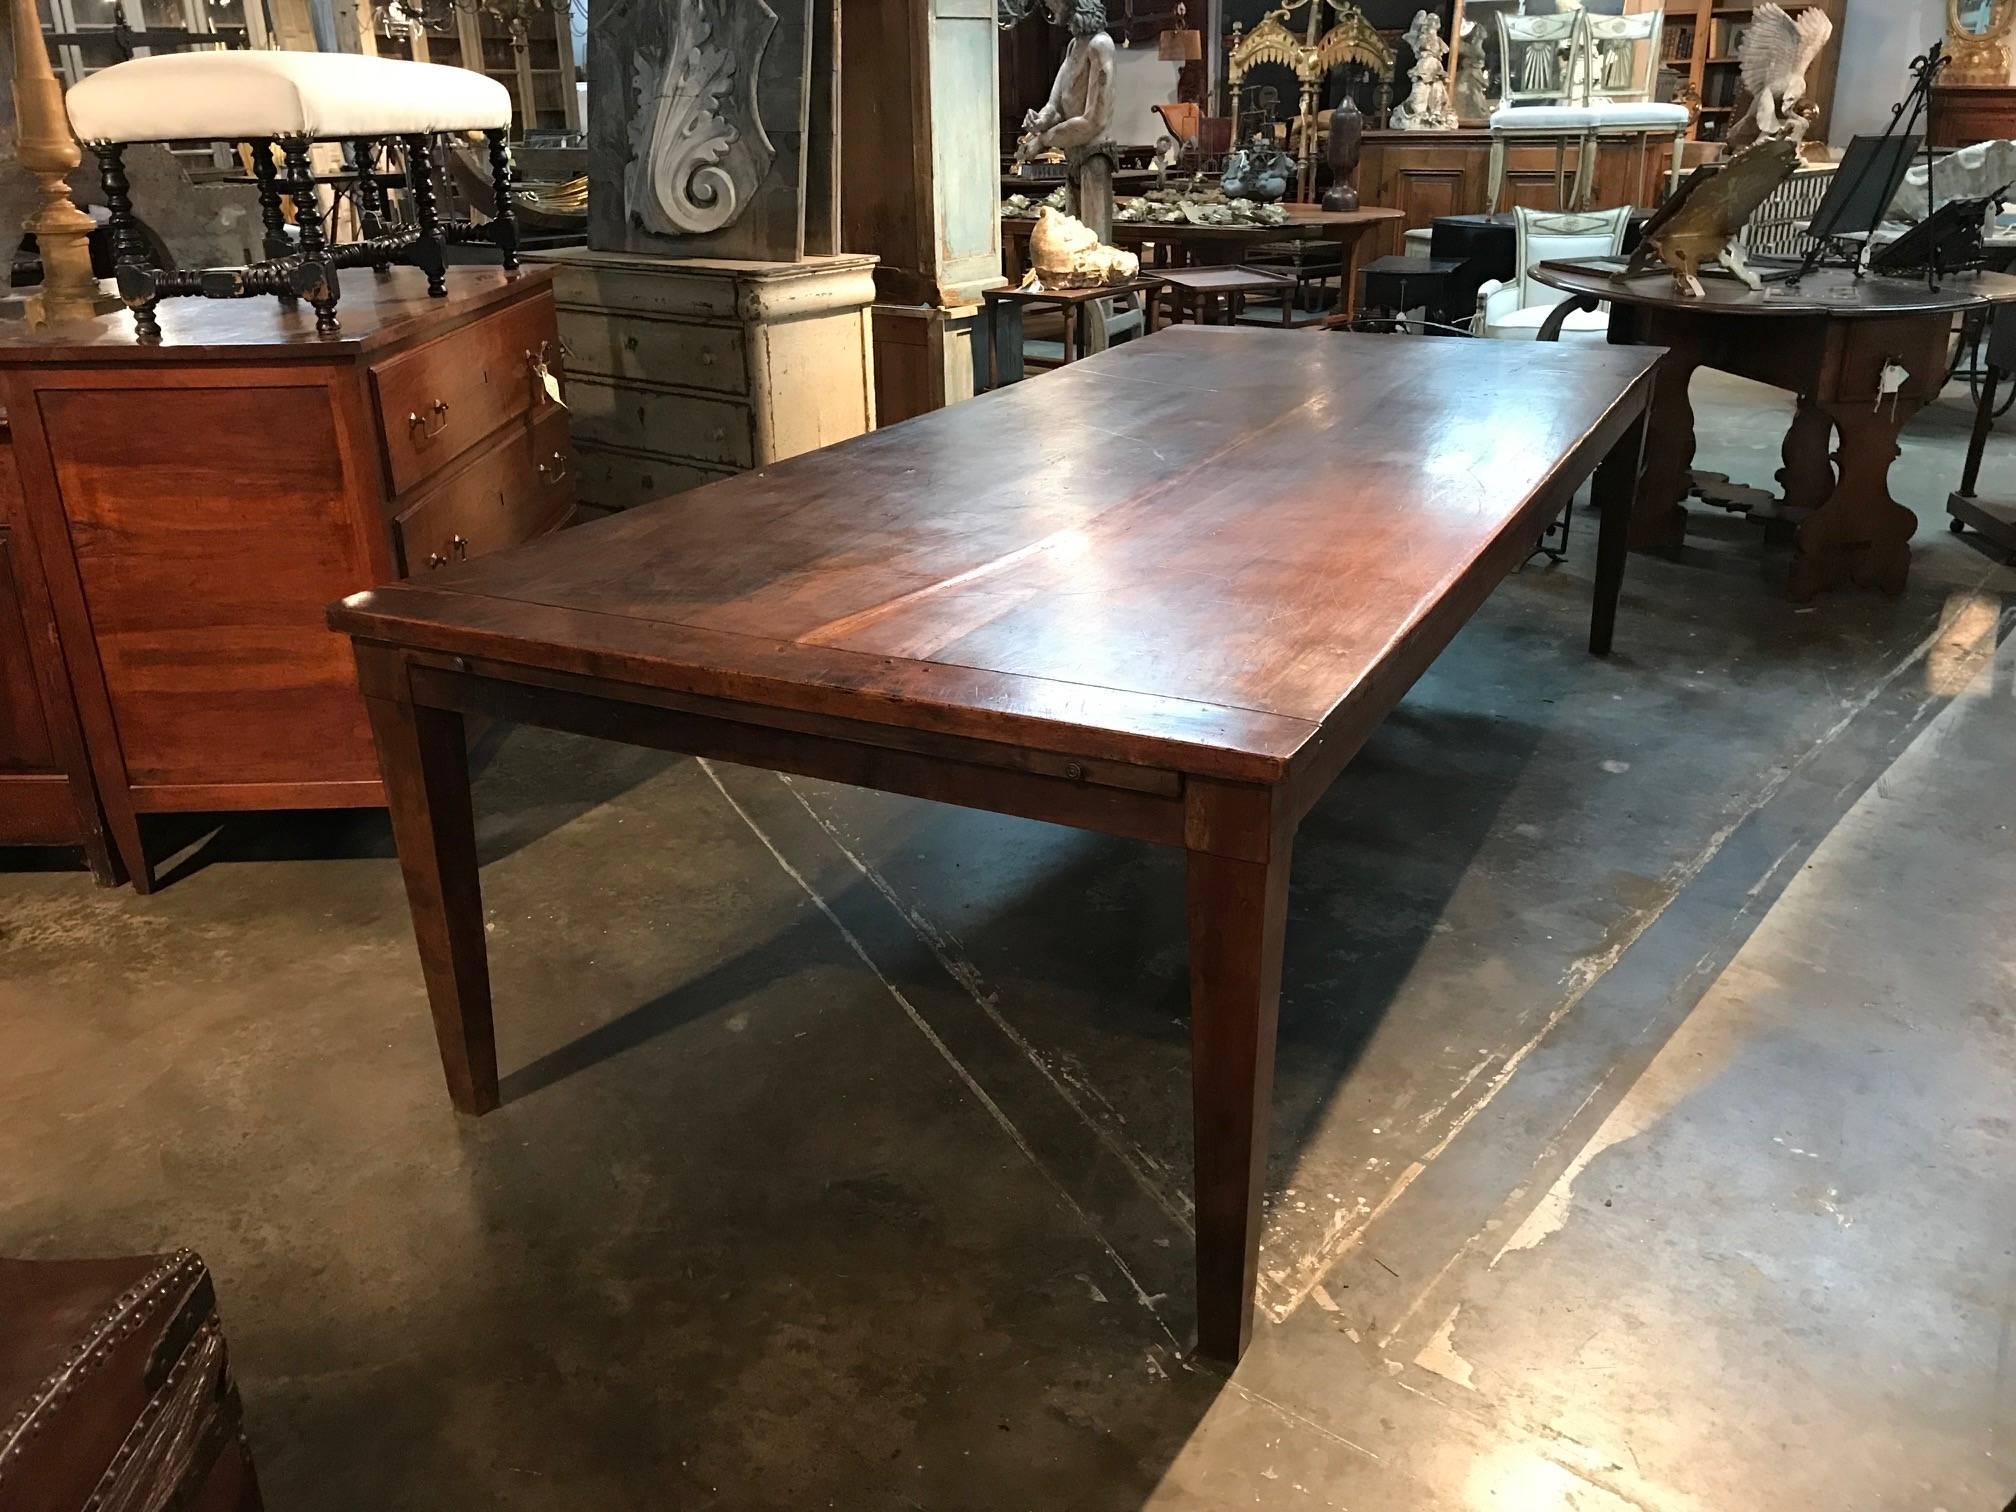 An outstanding grand scale table from Northern Italy. Soundly constructed from very thick planks of walnut. Designed in a classical farmhouse style. There are wonderful pullouts at each end of the table - extending the table substantially. The table